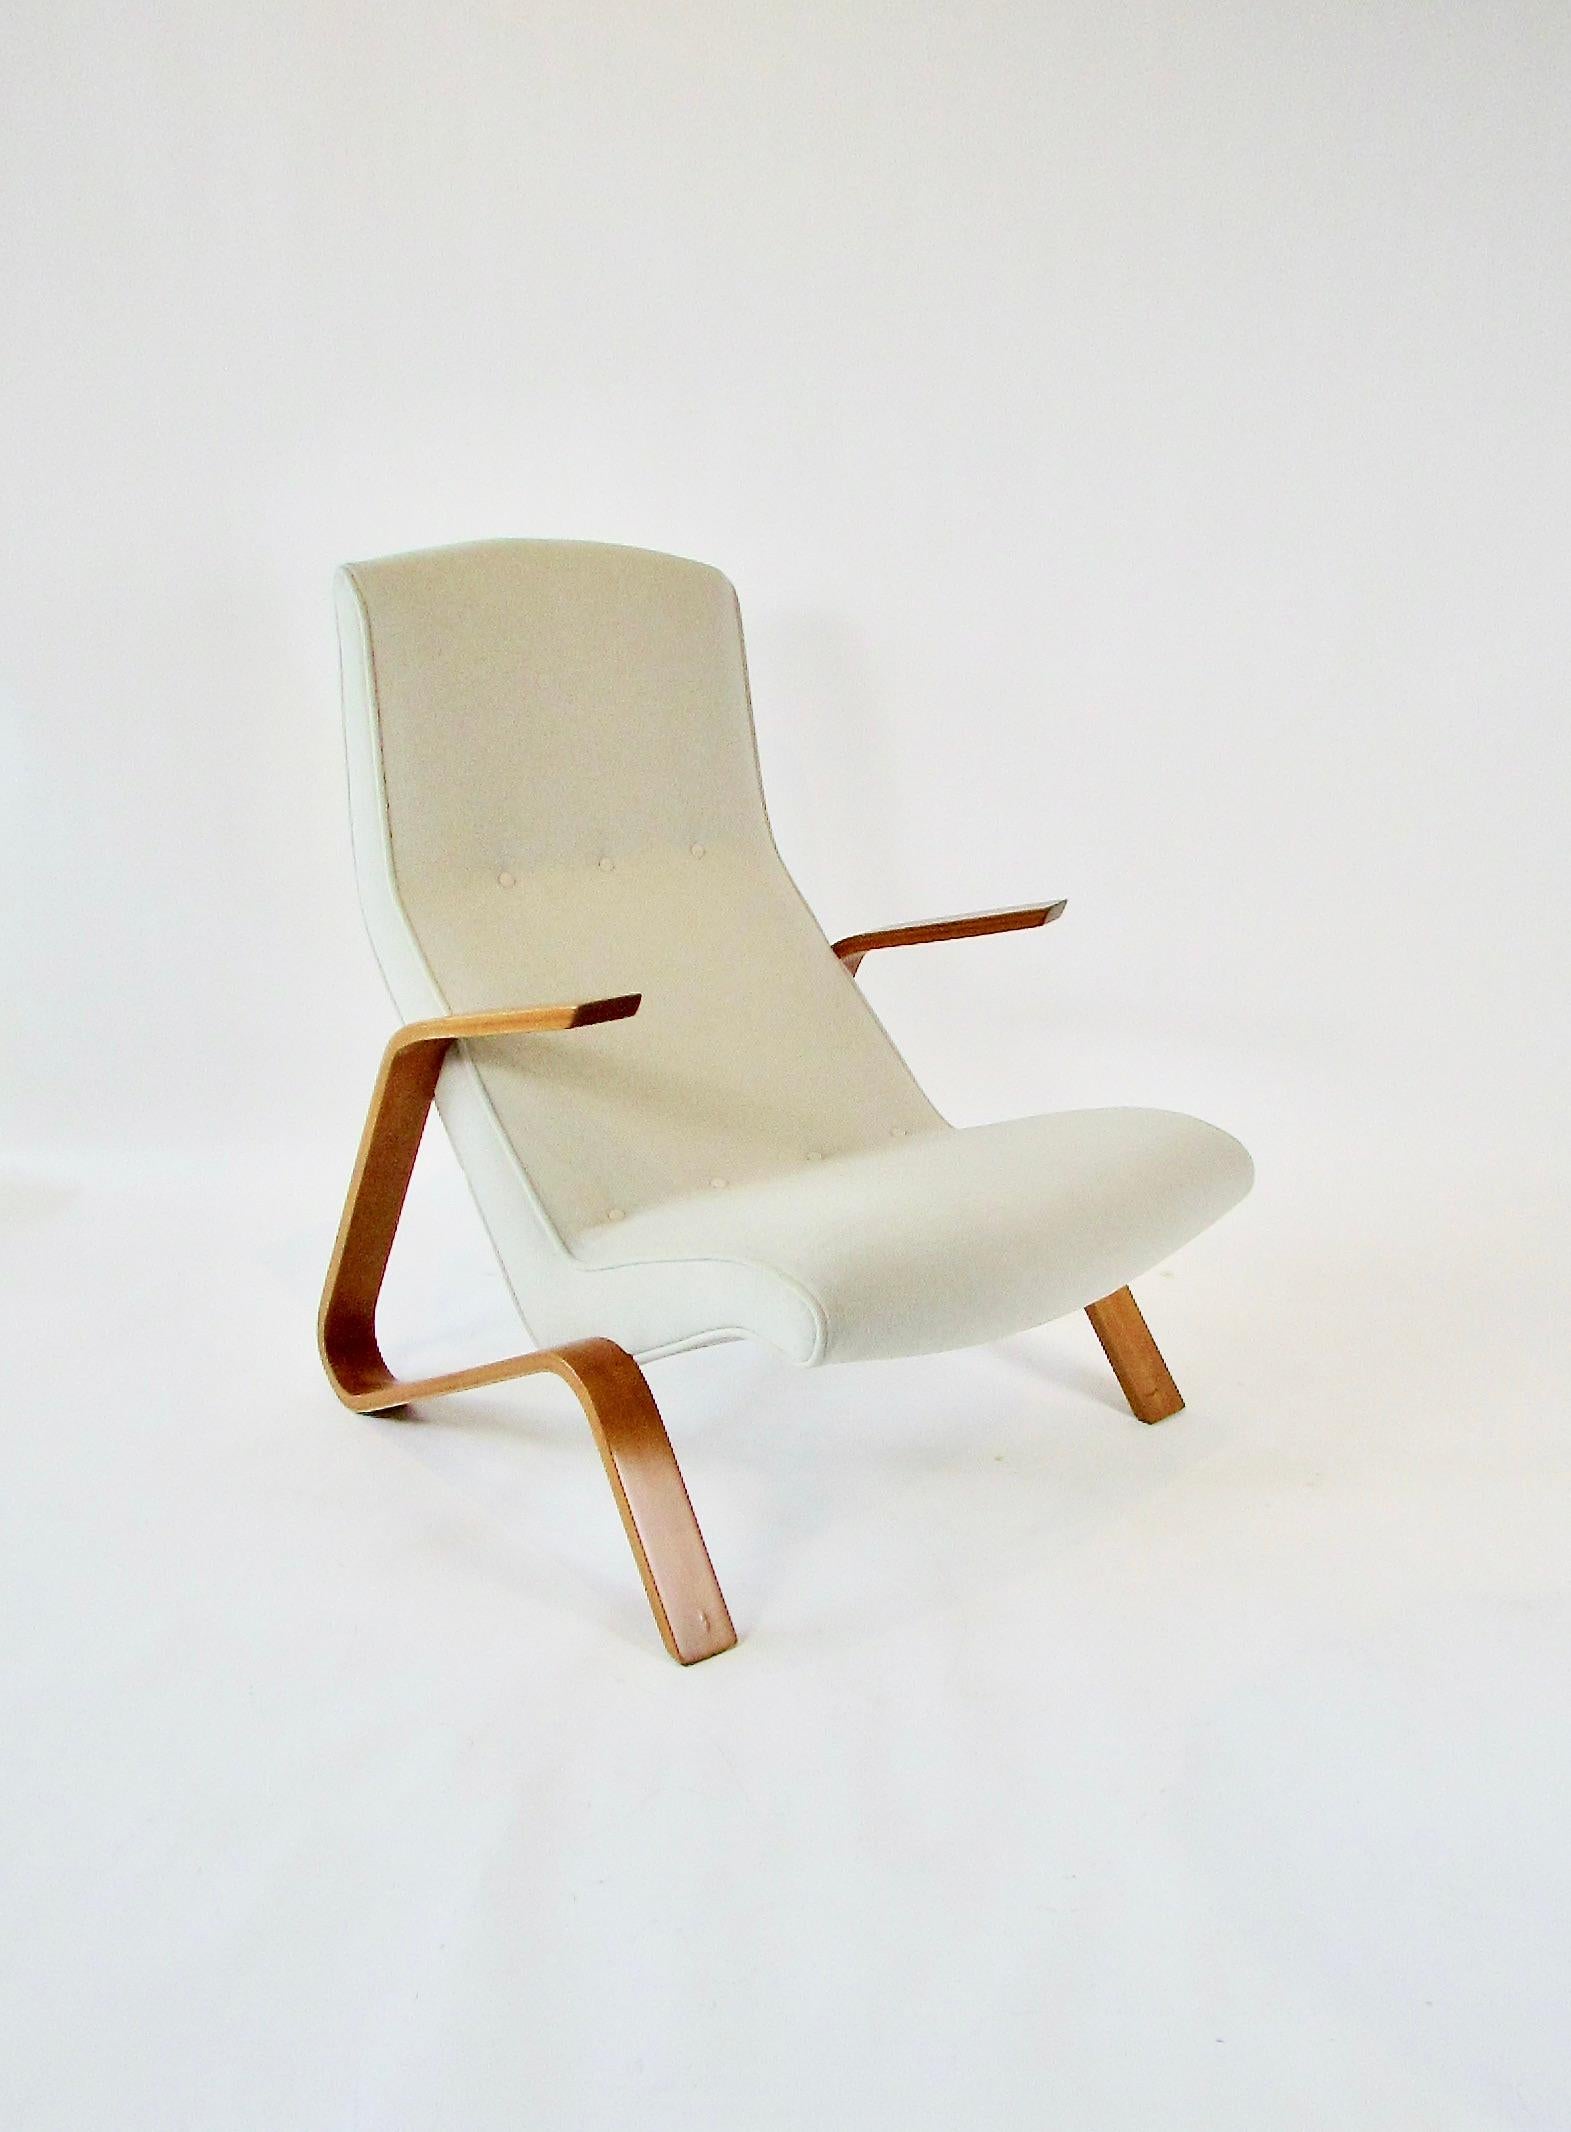 Properly Restored Early Production Eero Saarinen Grasshopper Chair for Knoll In Good Condition For Sale In Ferndale, MI